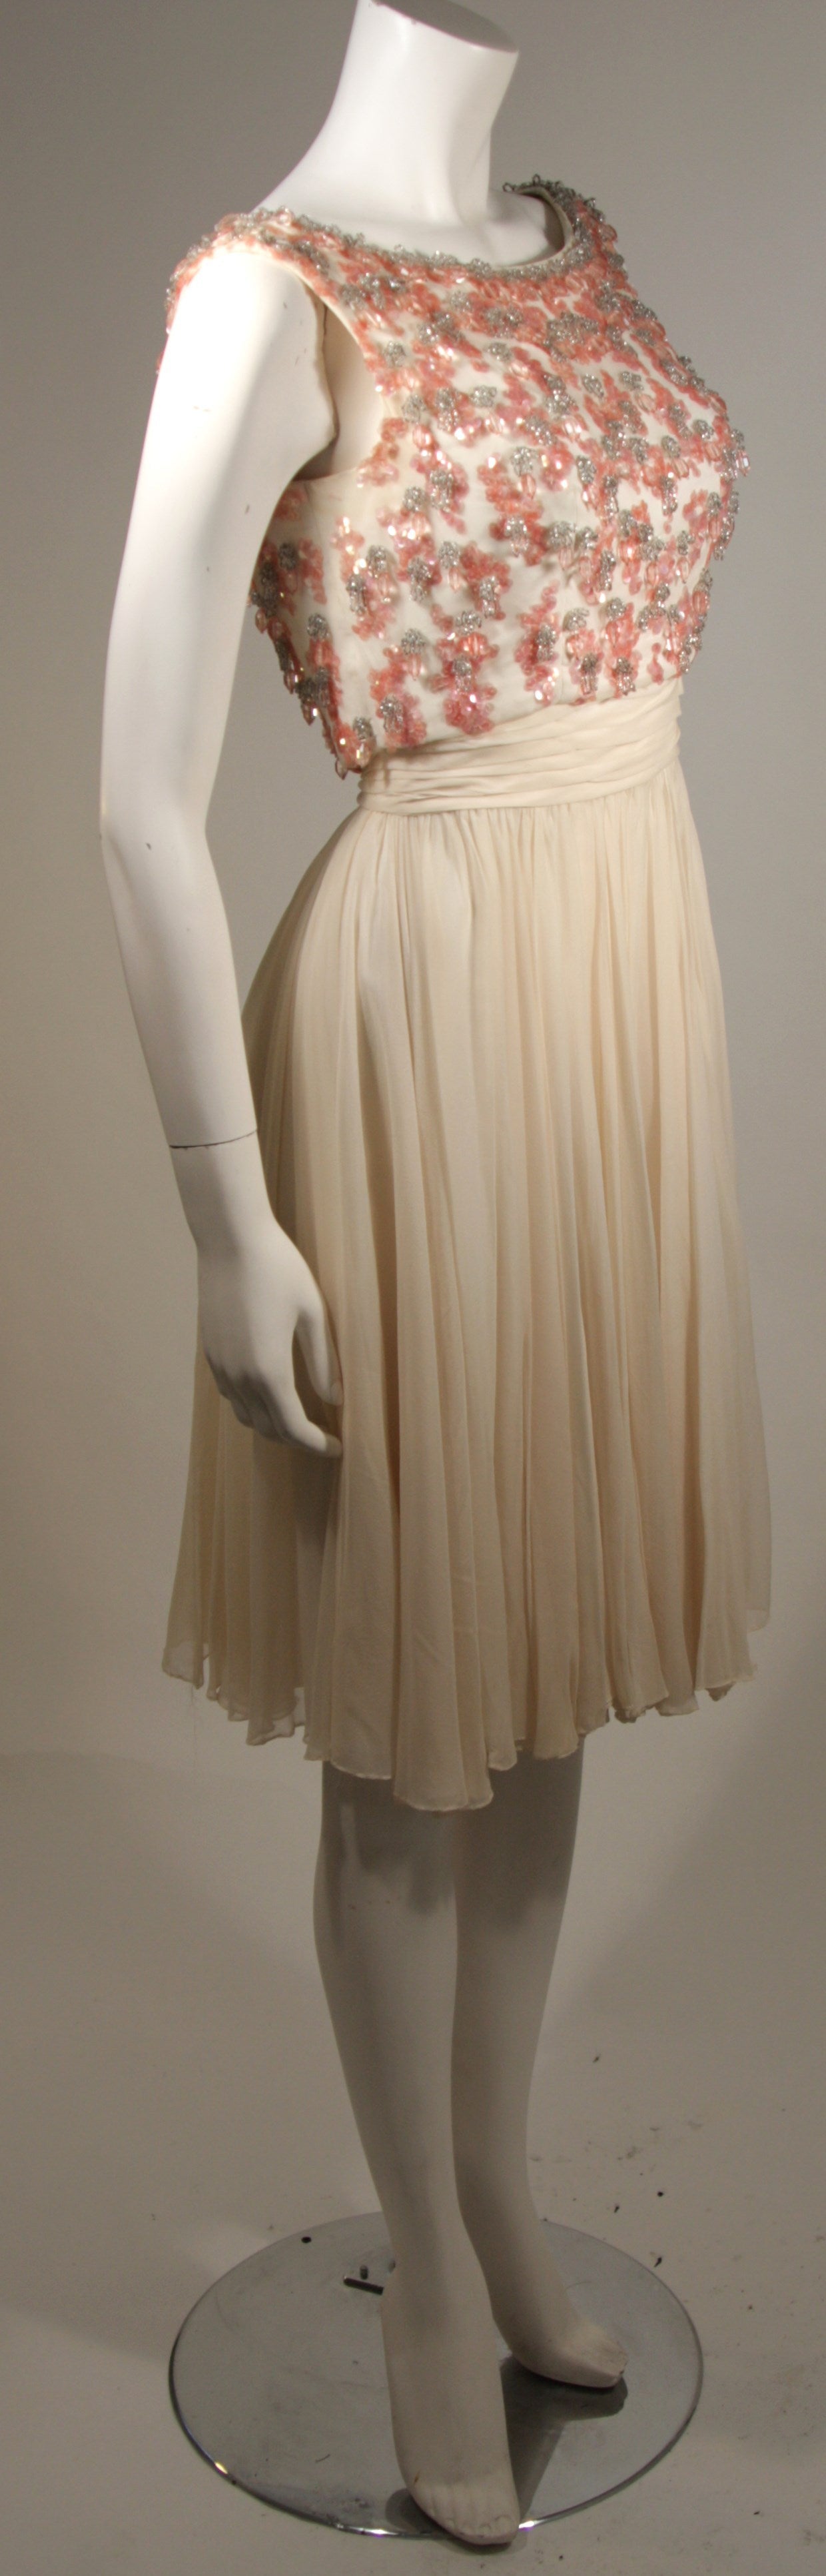 Brown Pat Sandler Ivory Chiffon Cocktail Dress with Pink Embellishment Accents For Sale